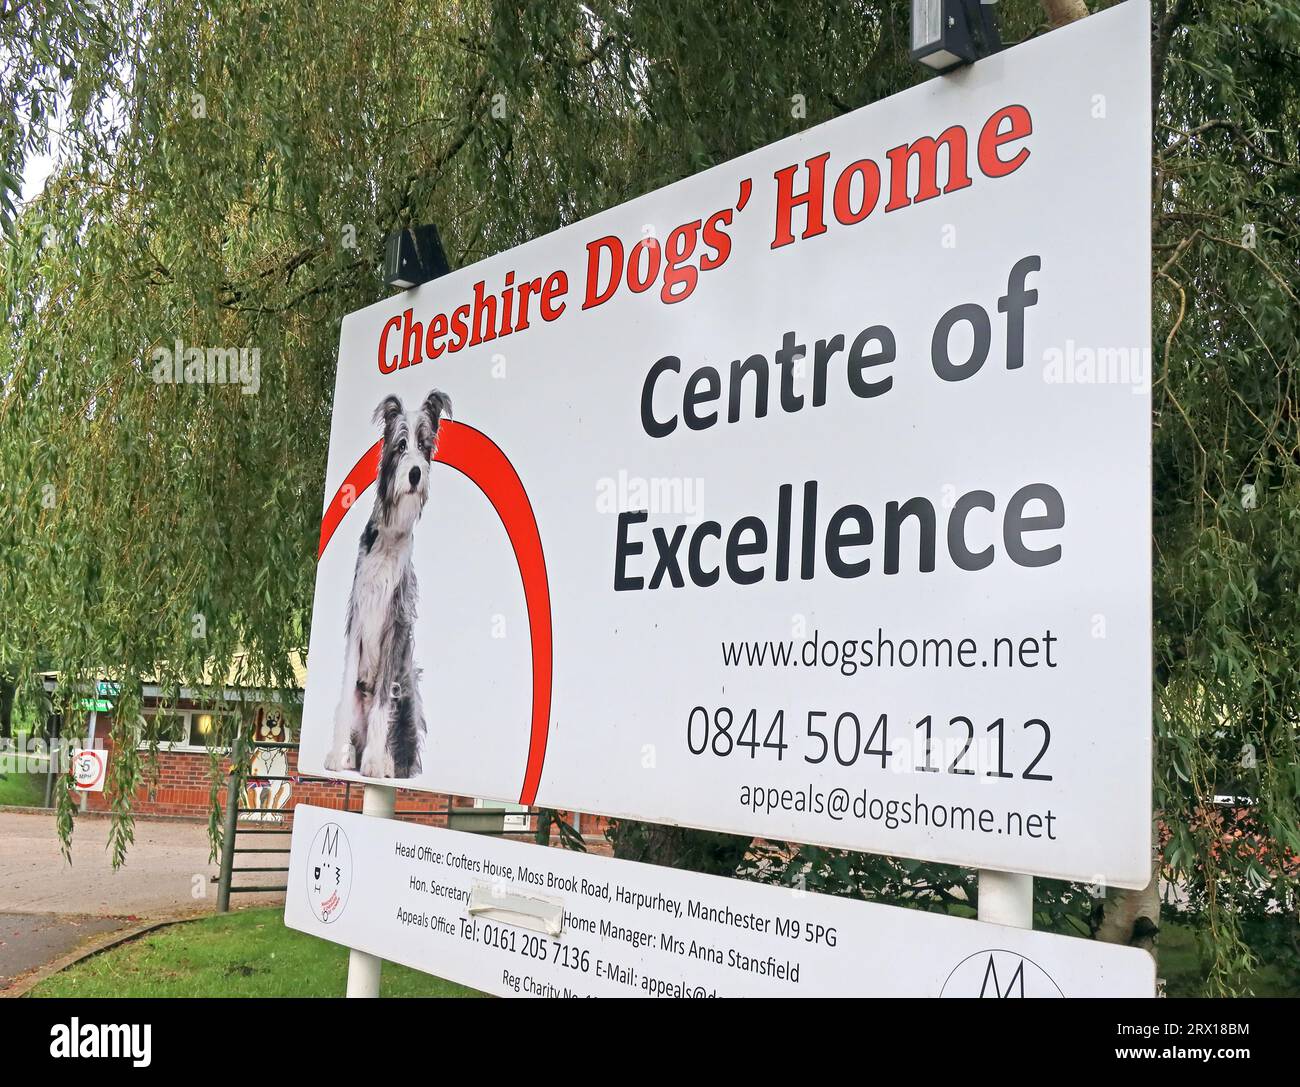 Cheshire Dogs Home, Centre of Excellence, Grappenhall, 225 Knutsford Rd, Thelwall, Warrington, Cheshire, England, UK, WA4 3JZ Stockfoto